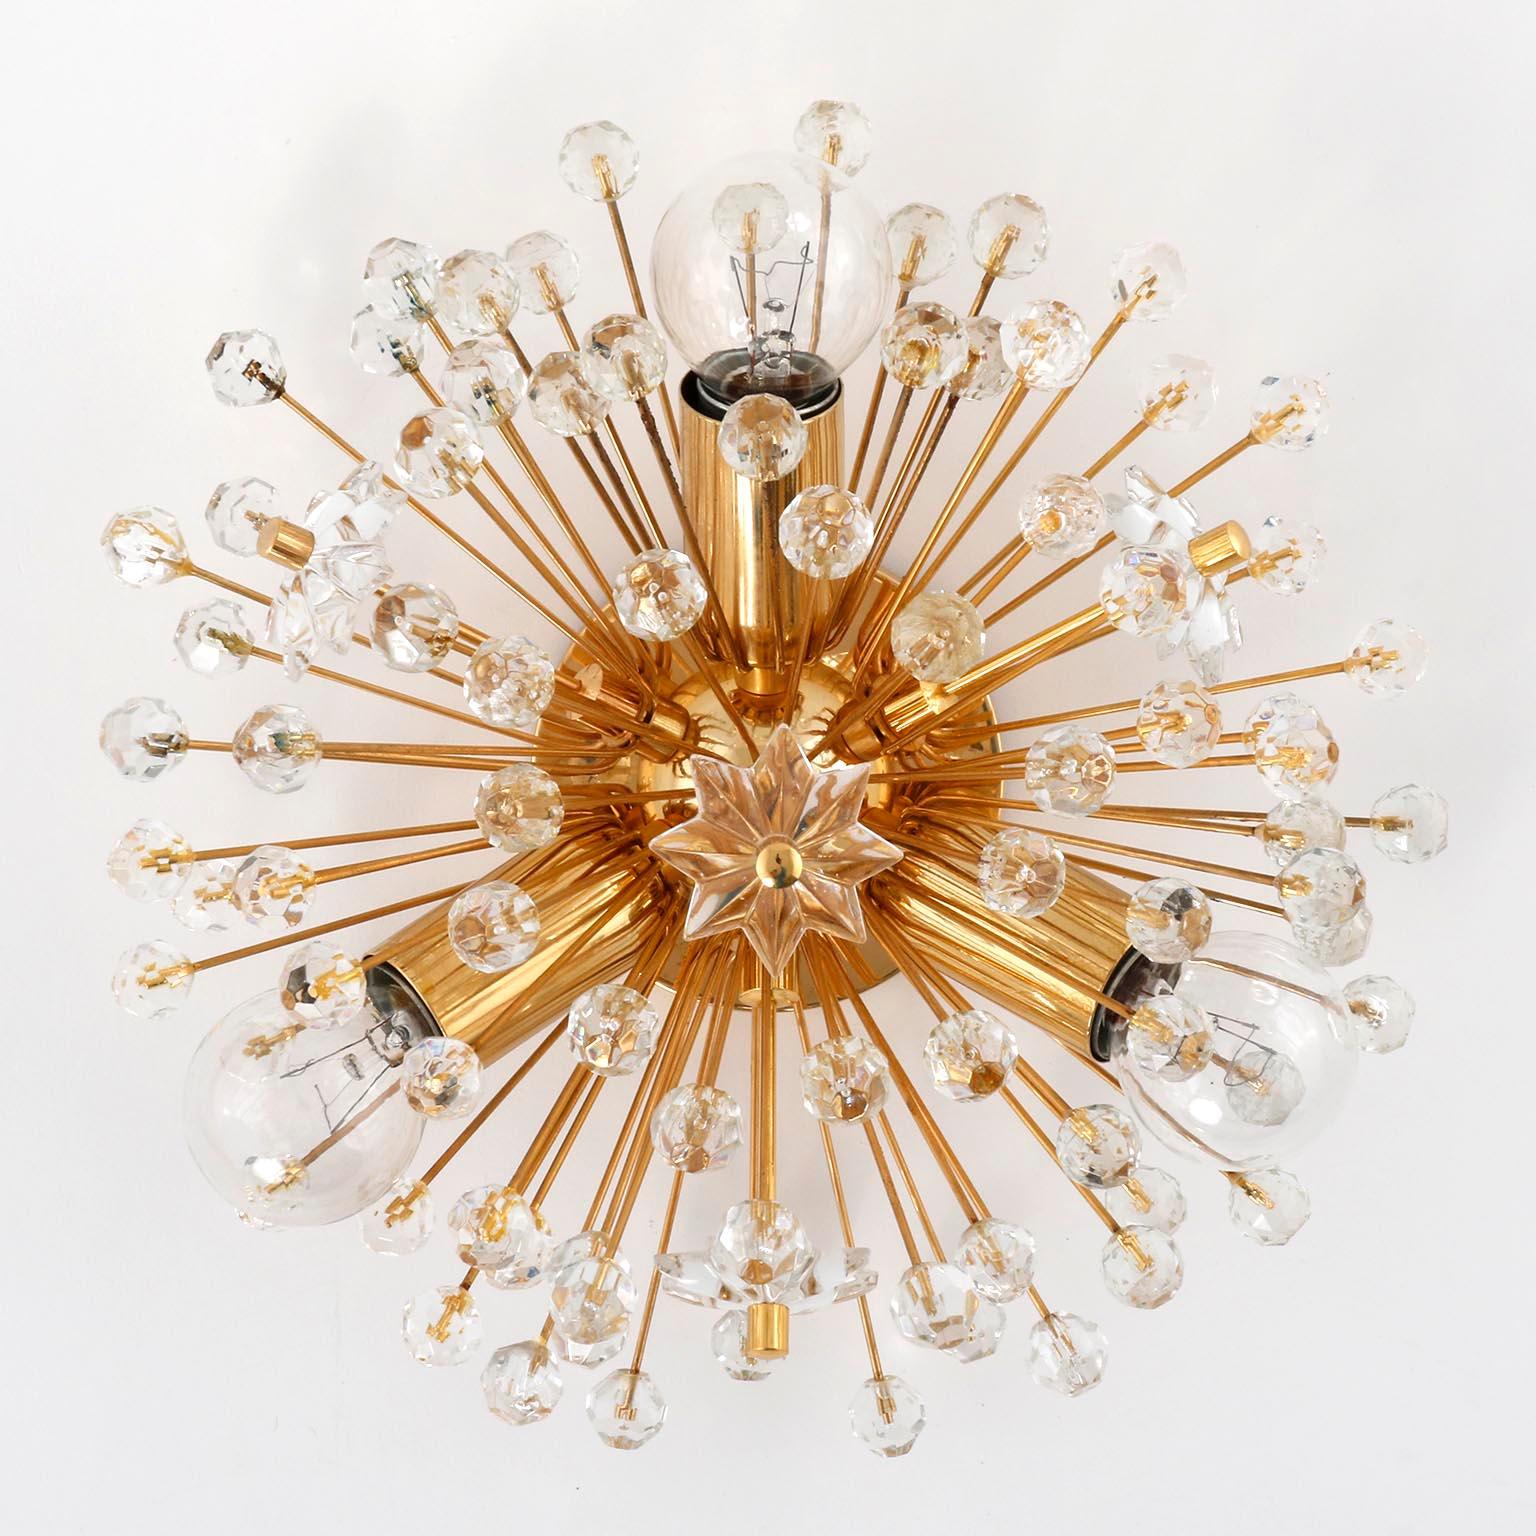 A pair of beautiful Viennese snowflake / blow ball / Sputnik wall lights designed by Emil Stejnar, Austria, manufactured in midcentury, circa 1970 (late 1960s or early 1970s).
High-quality light fixtures made of a 24-carat gold-plated brass frame